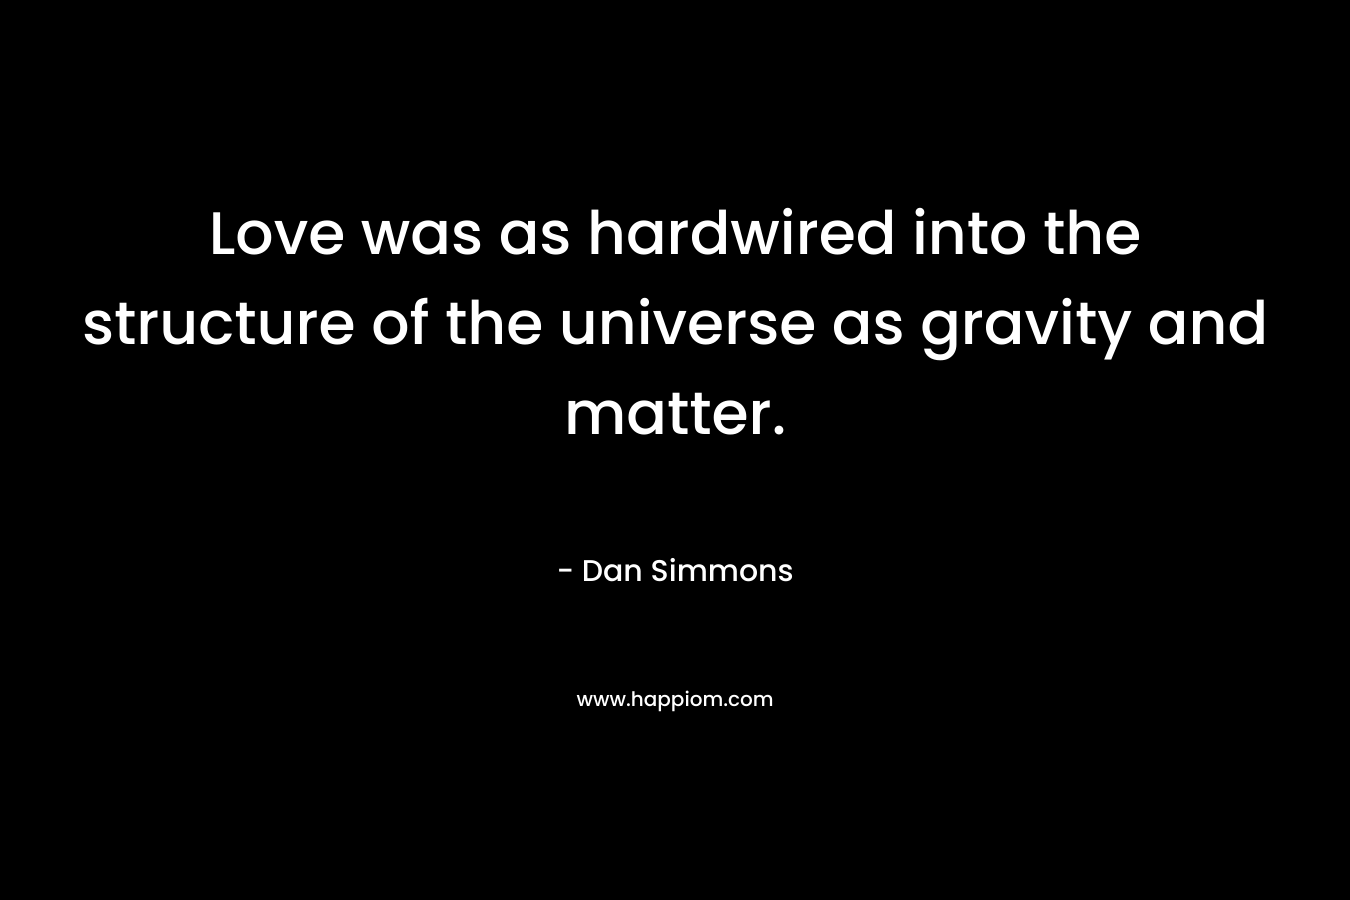 Love was as hardwired into the structure of the universe as gravity and matter.